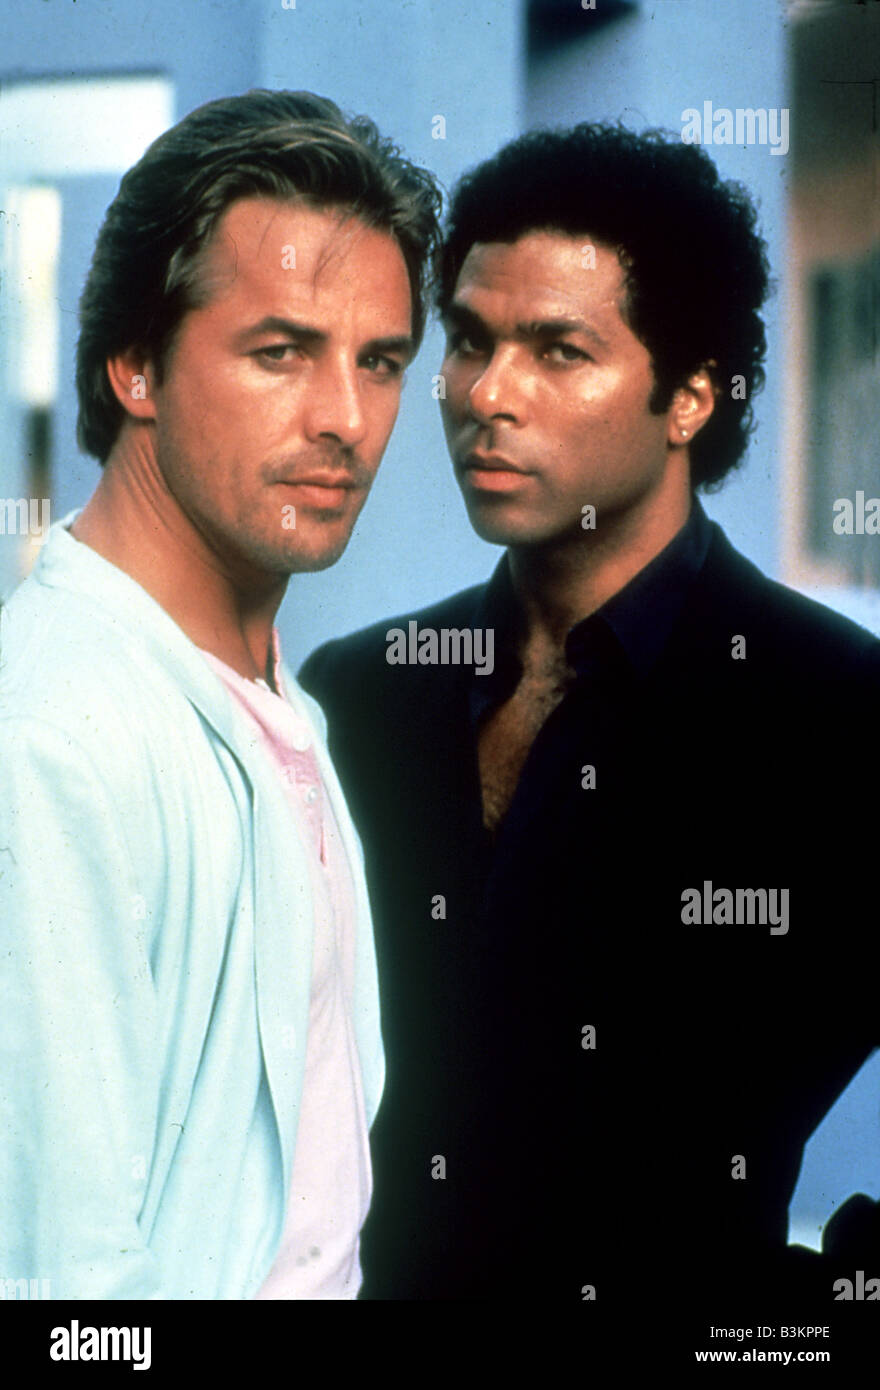 http://c8.alamy.com/comp/B3KPPE/miami-vice-us-tv-series-with-don-johnson-at-left-and-philip-michael-B3KPPE.jpg